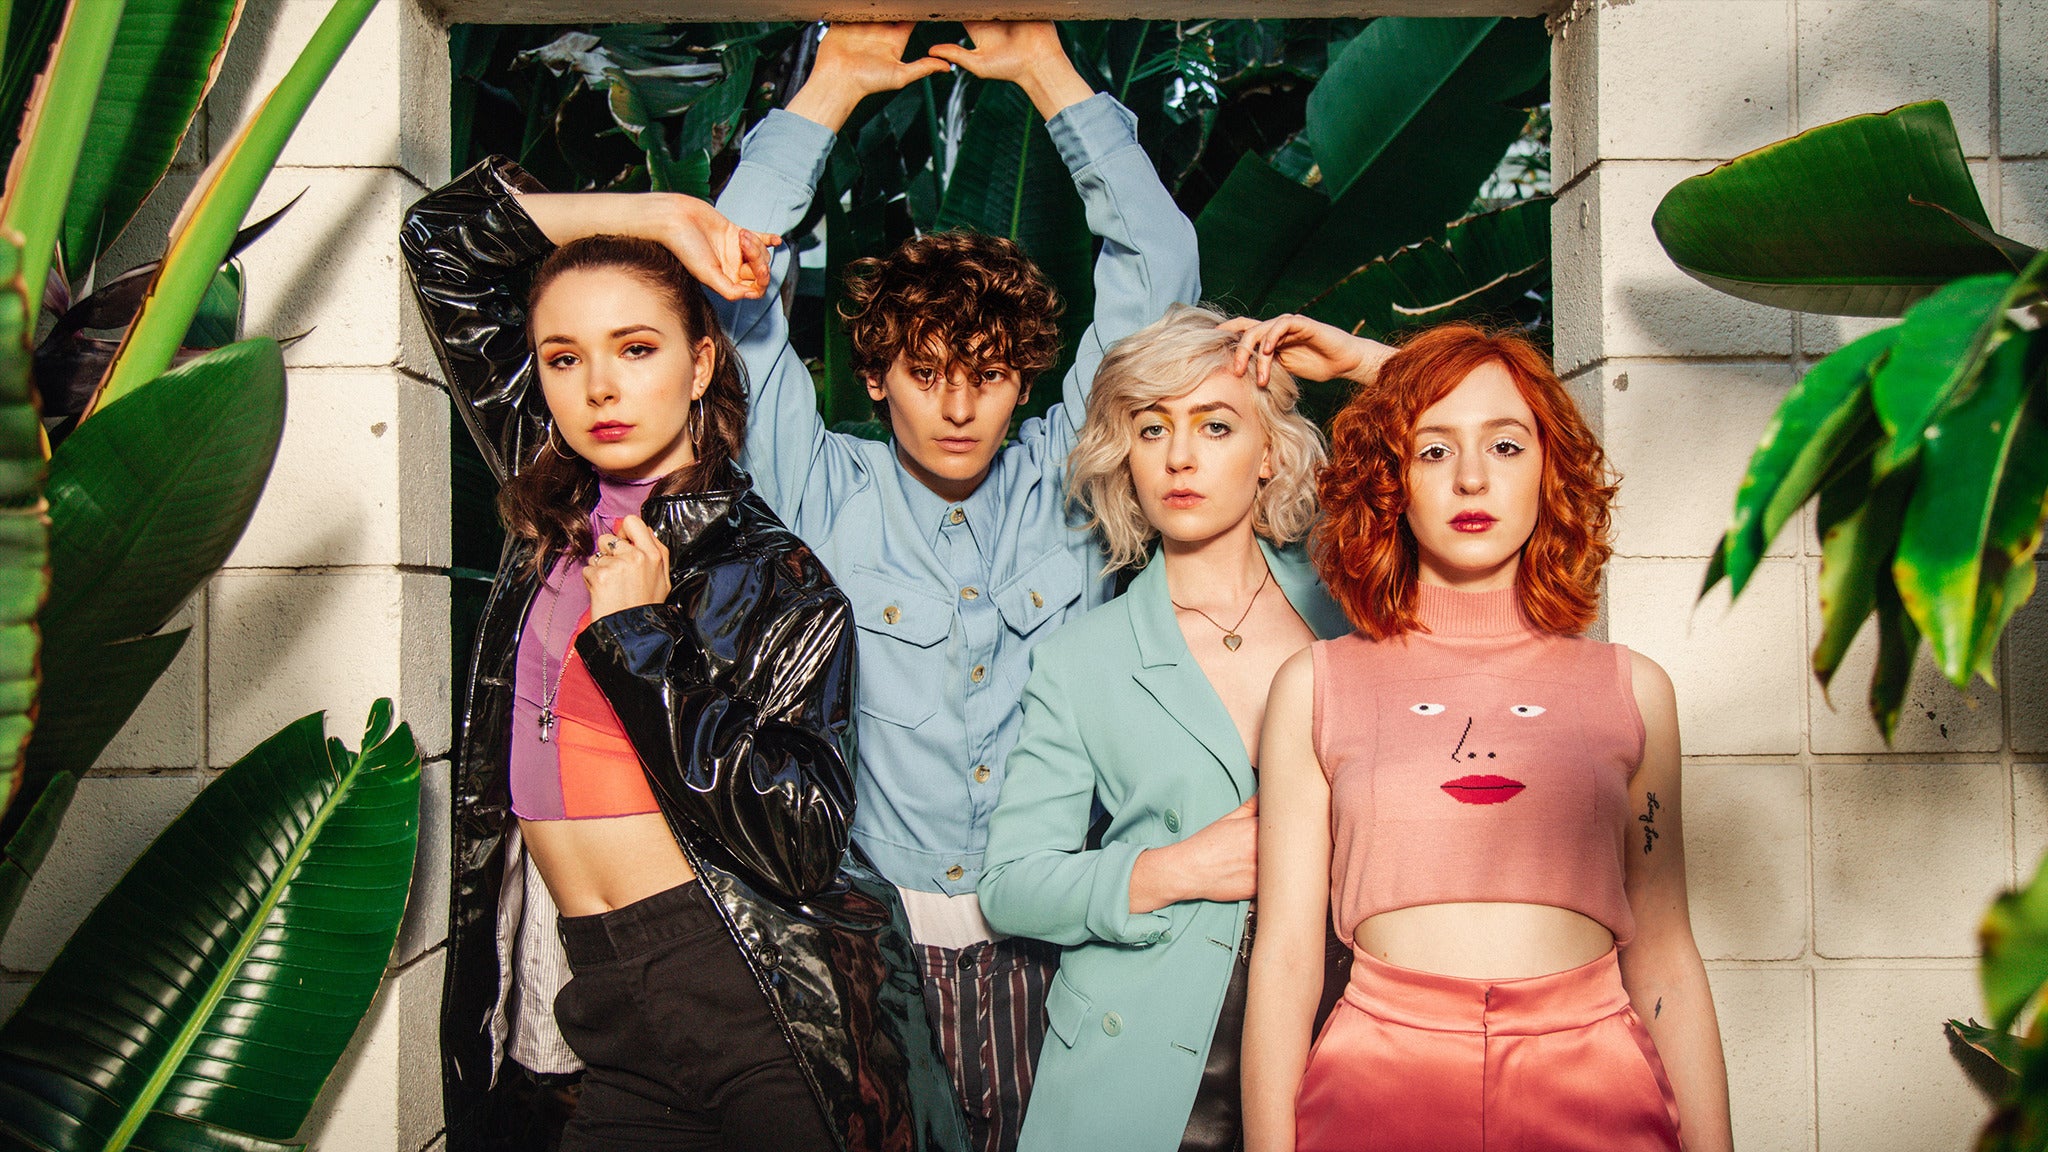 Advanced Placement Tour feat. The Regrettes/Welles/Micky James in Atlanta promo photo for SiriusXM presale offer code